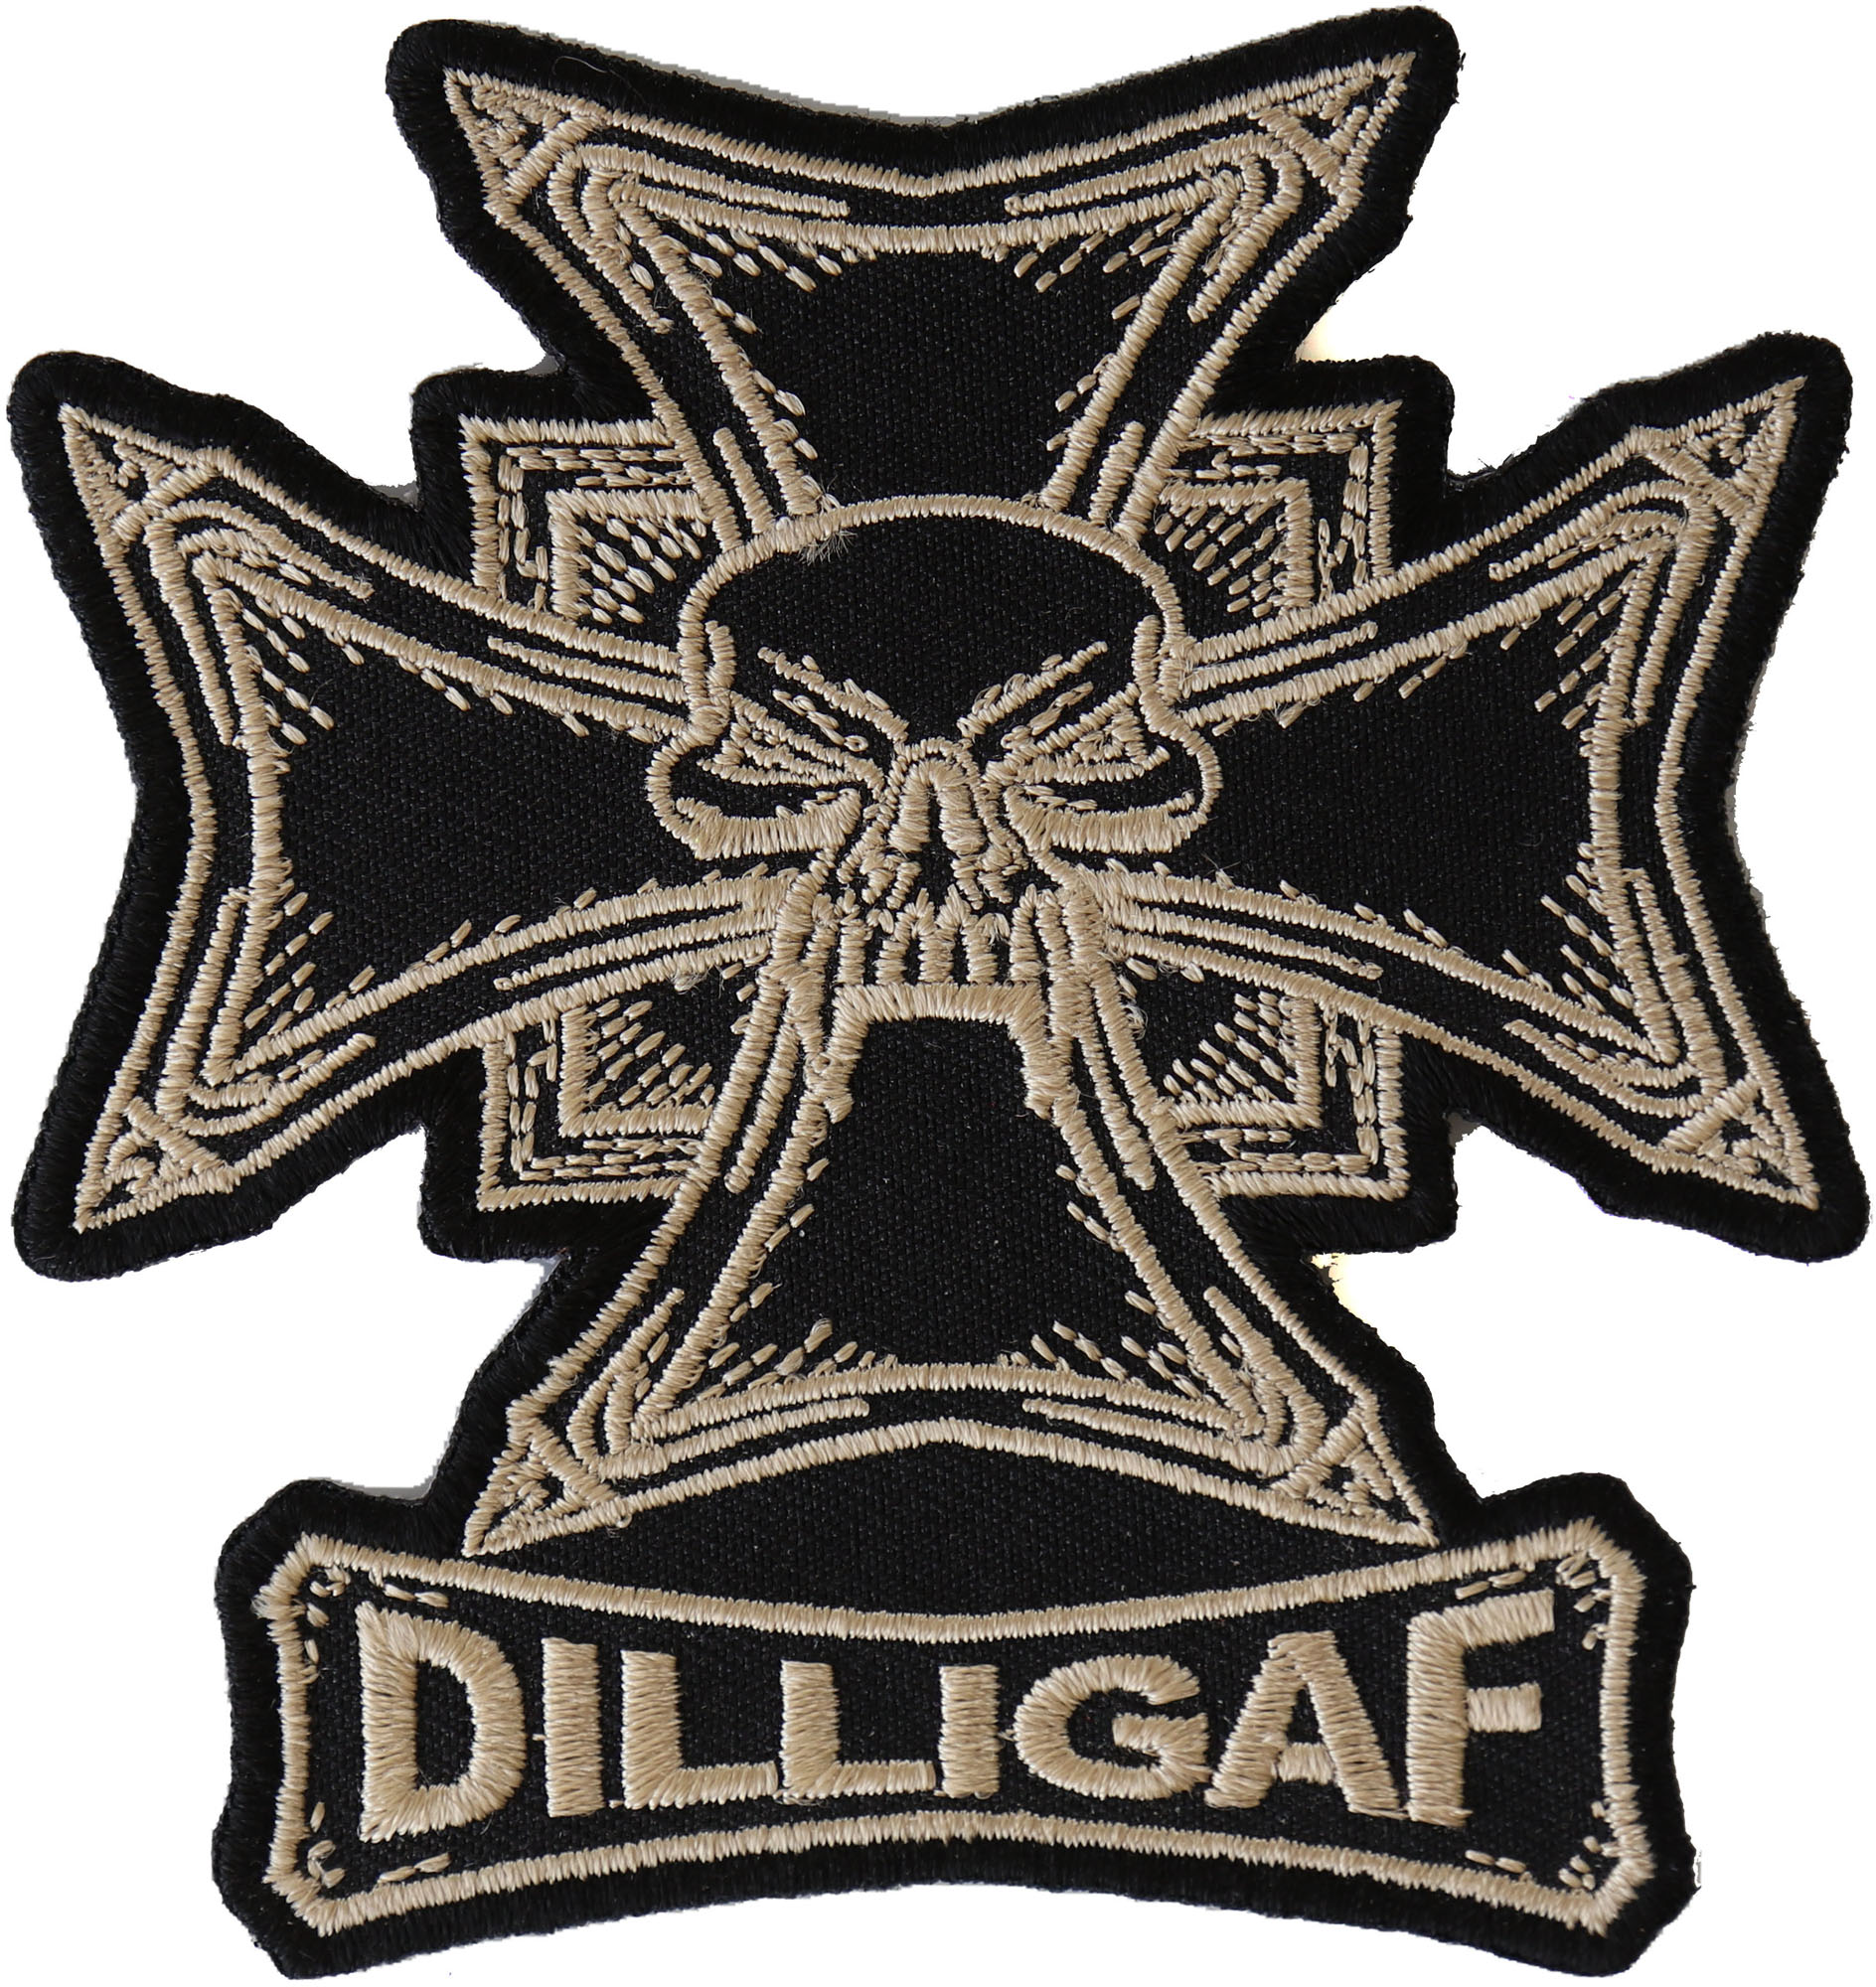 Dilligaf Skull and Cross Patch, Skull Patches by Ivamis Patches